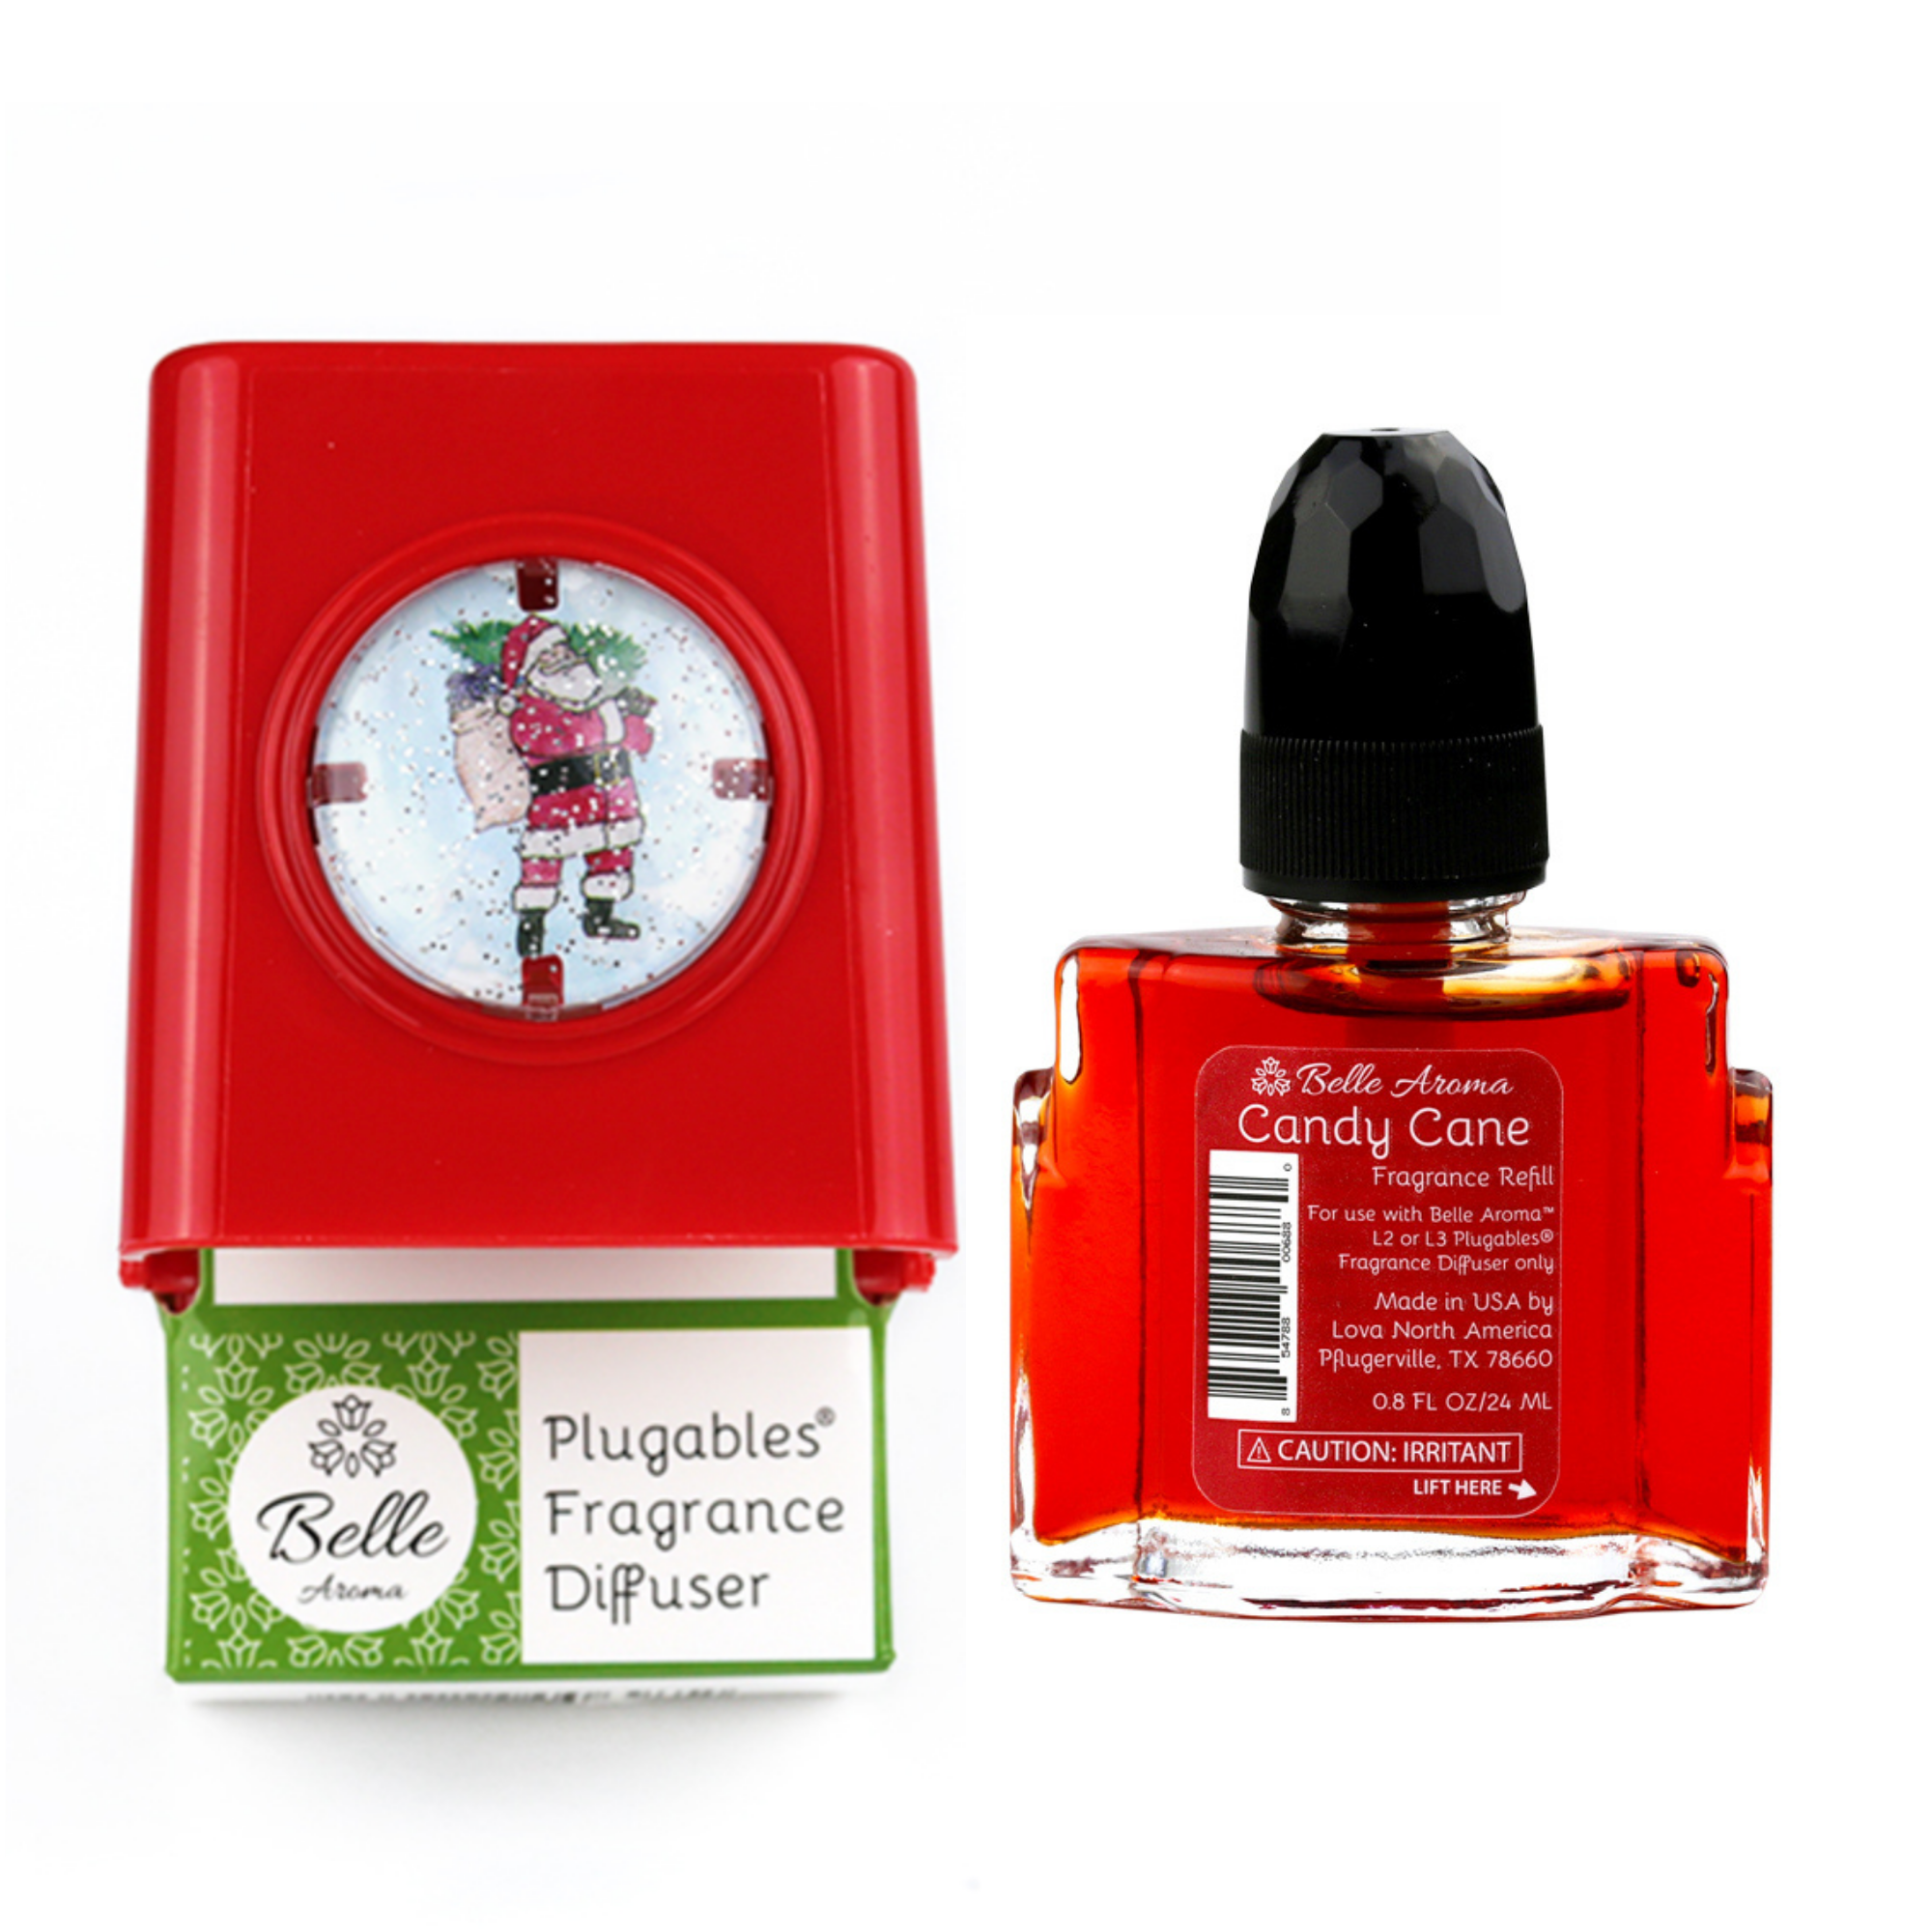 Glitter Domes™ Plugables® Aromalectric® Scented Oil Diffuser - Santa with Candy Cane Fragrance Oil Home Fragrance Accessories